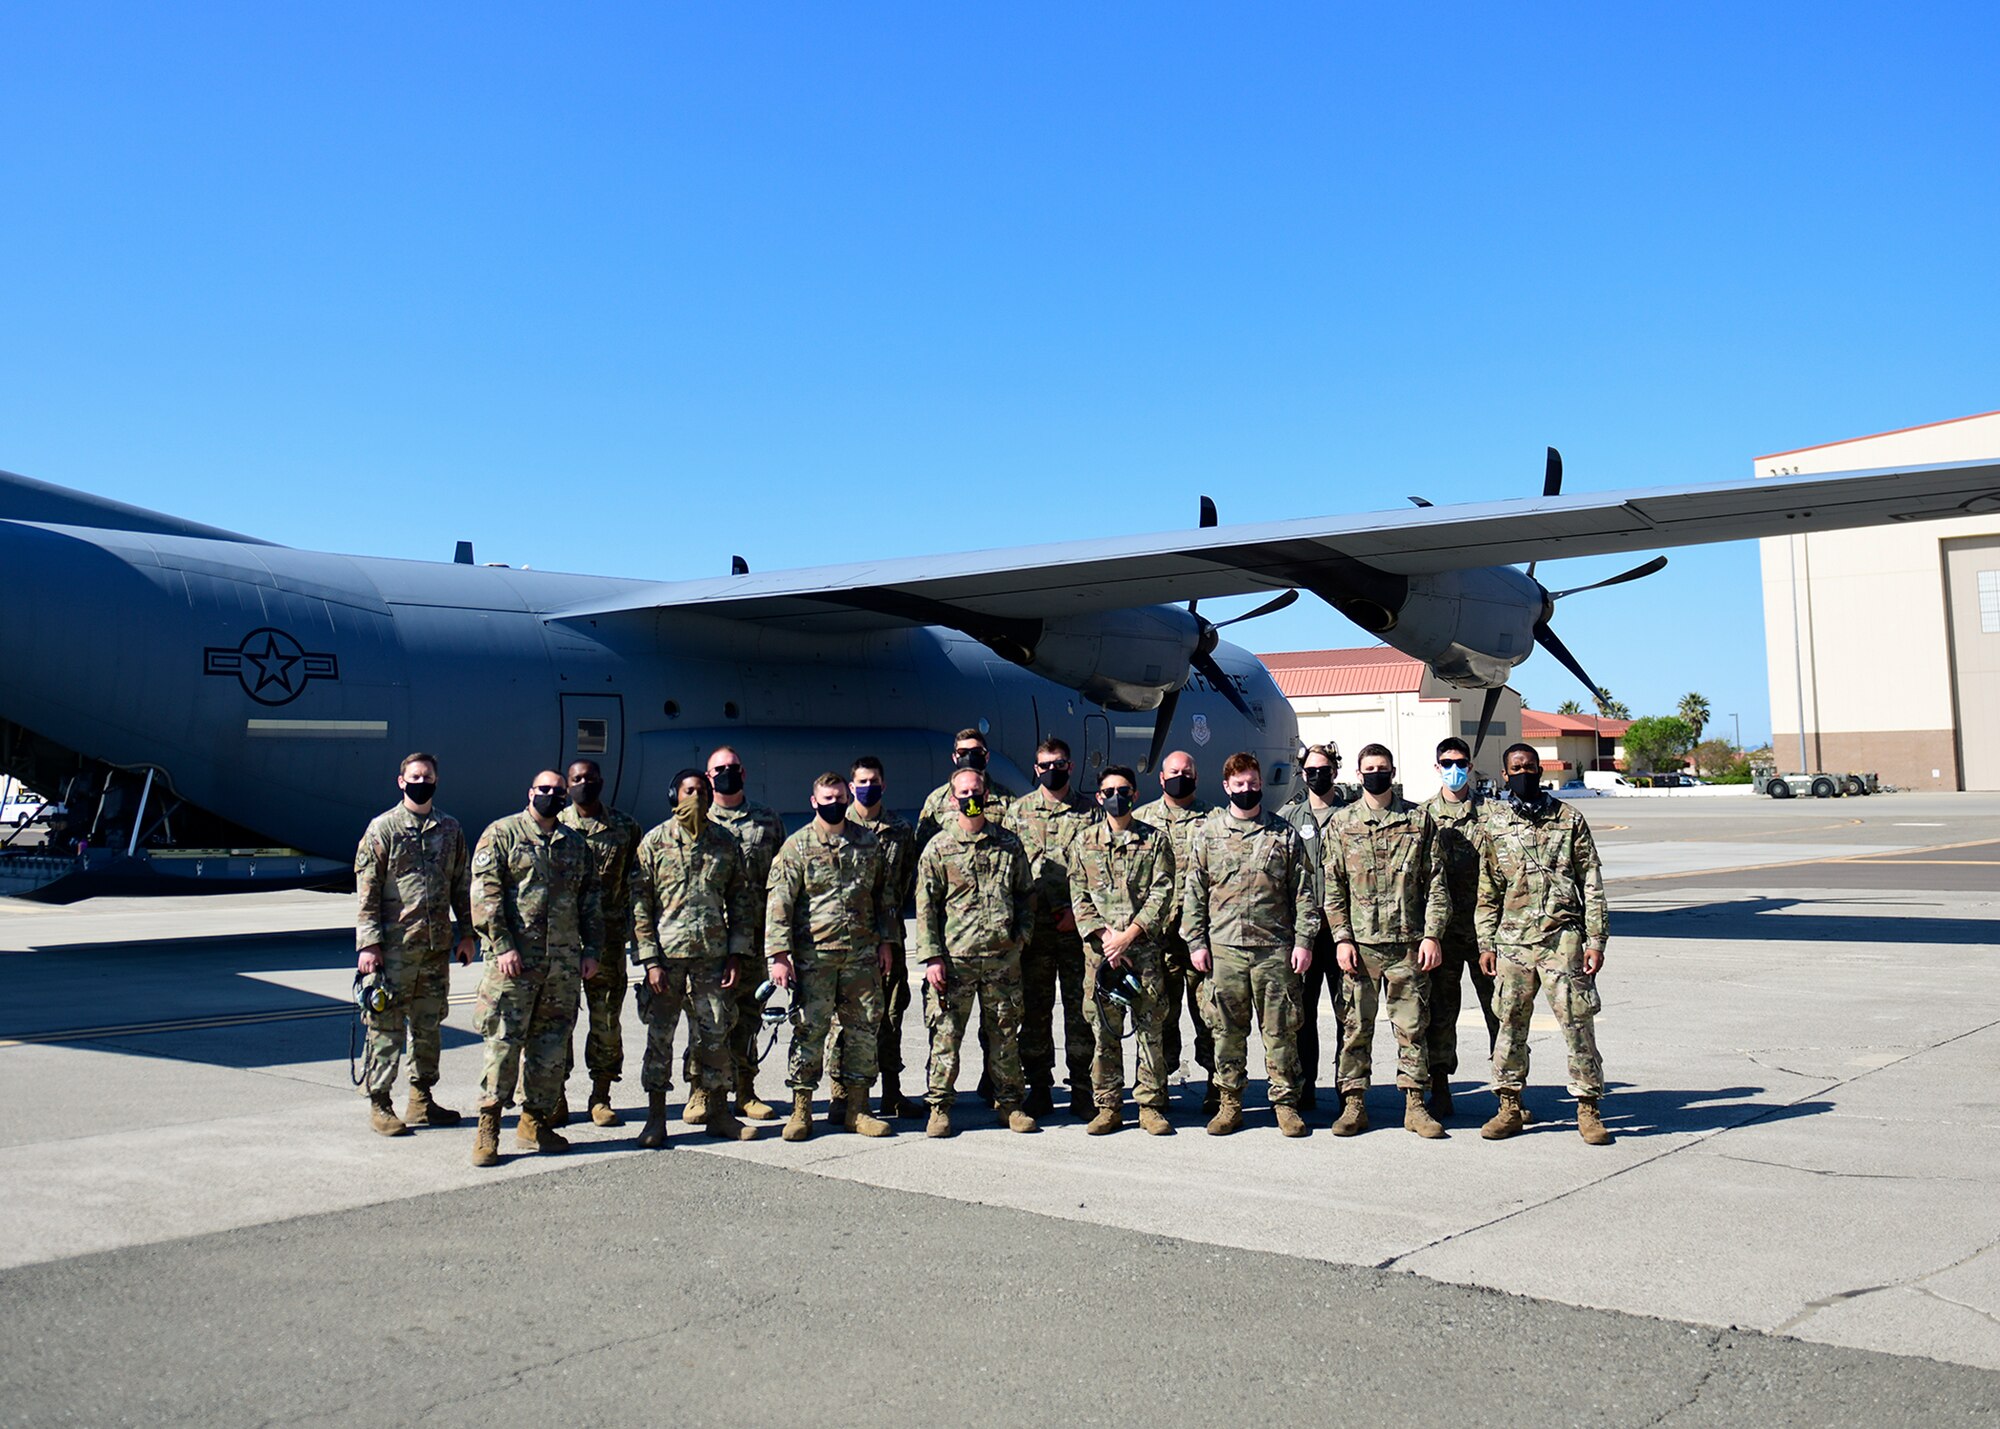 Airmen pose for a photo